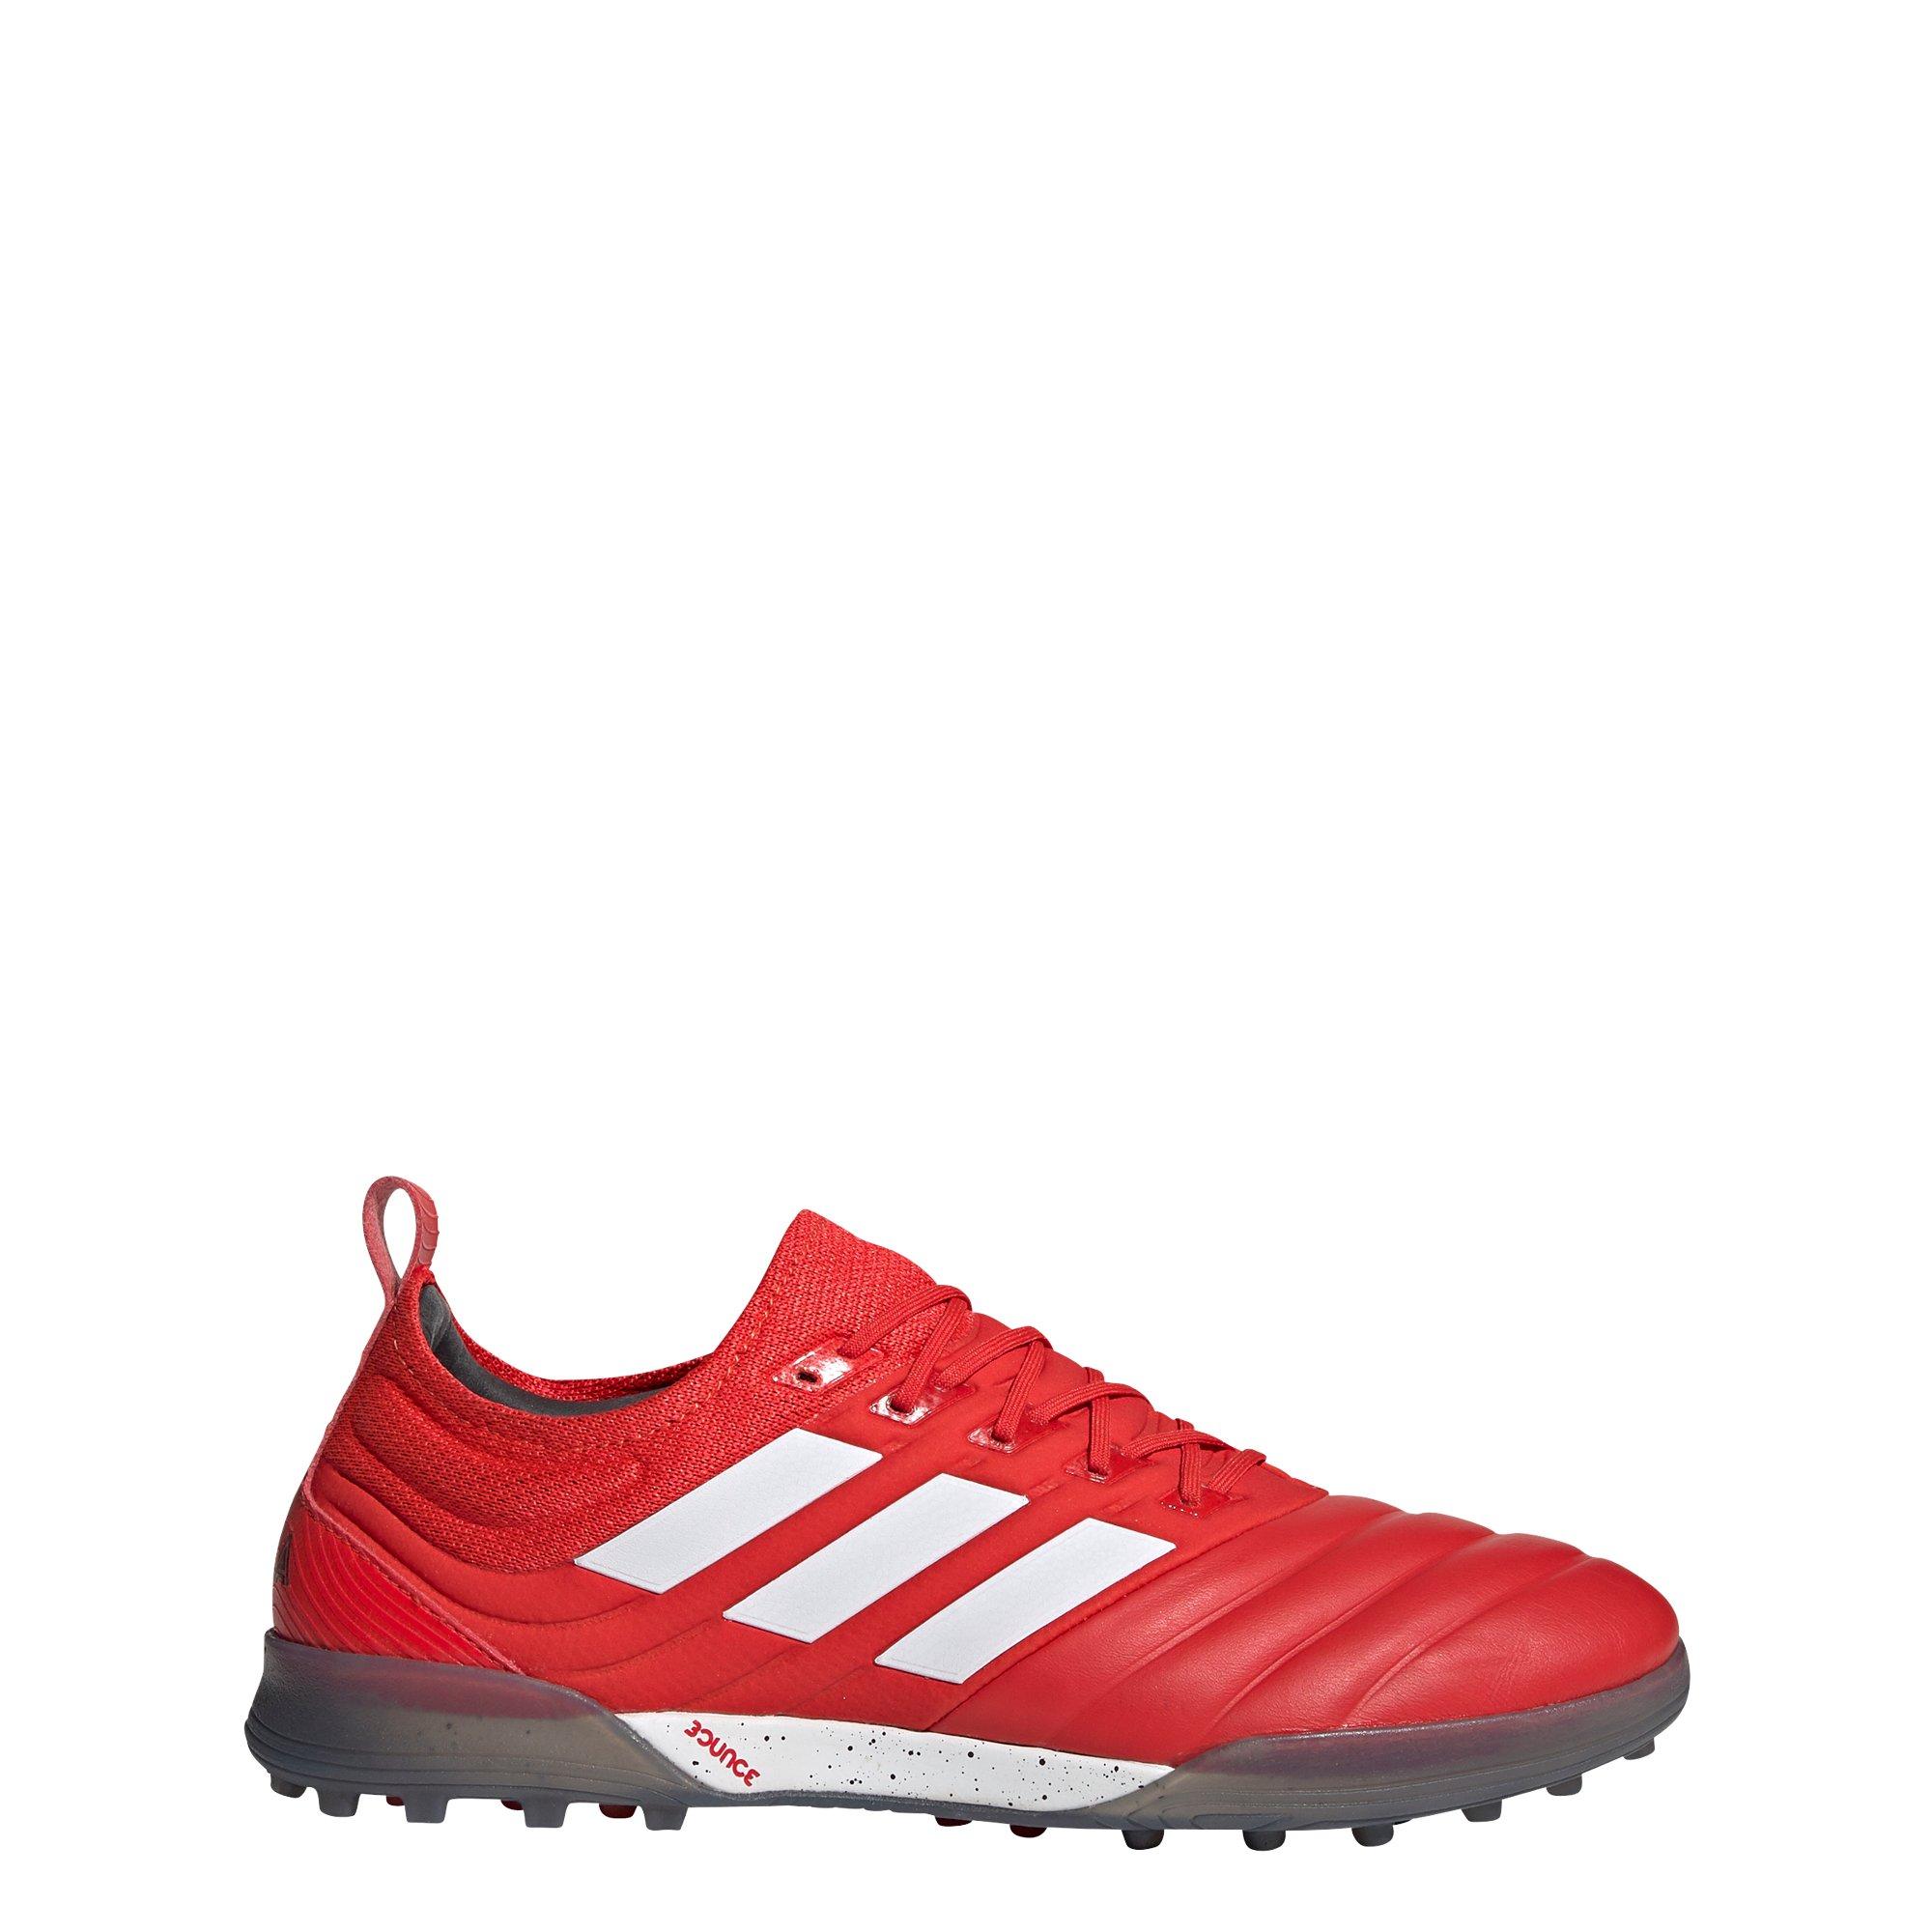 copa 20.1 turf shoes